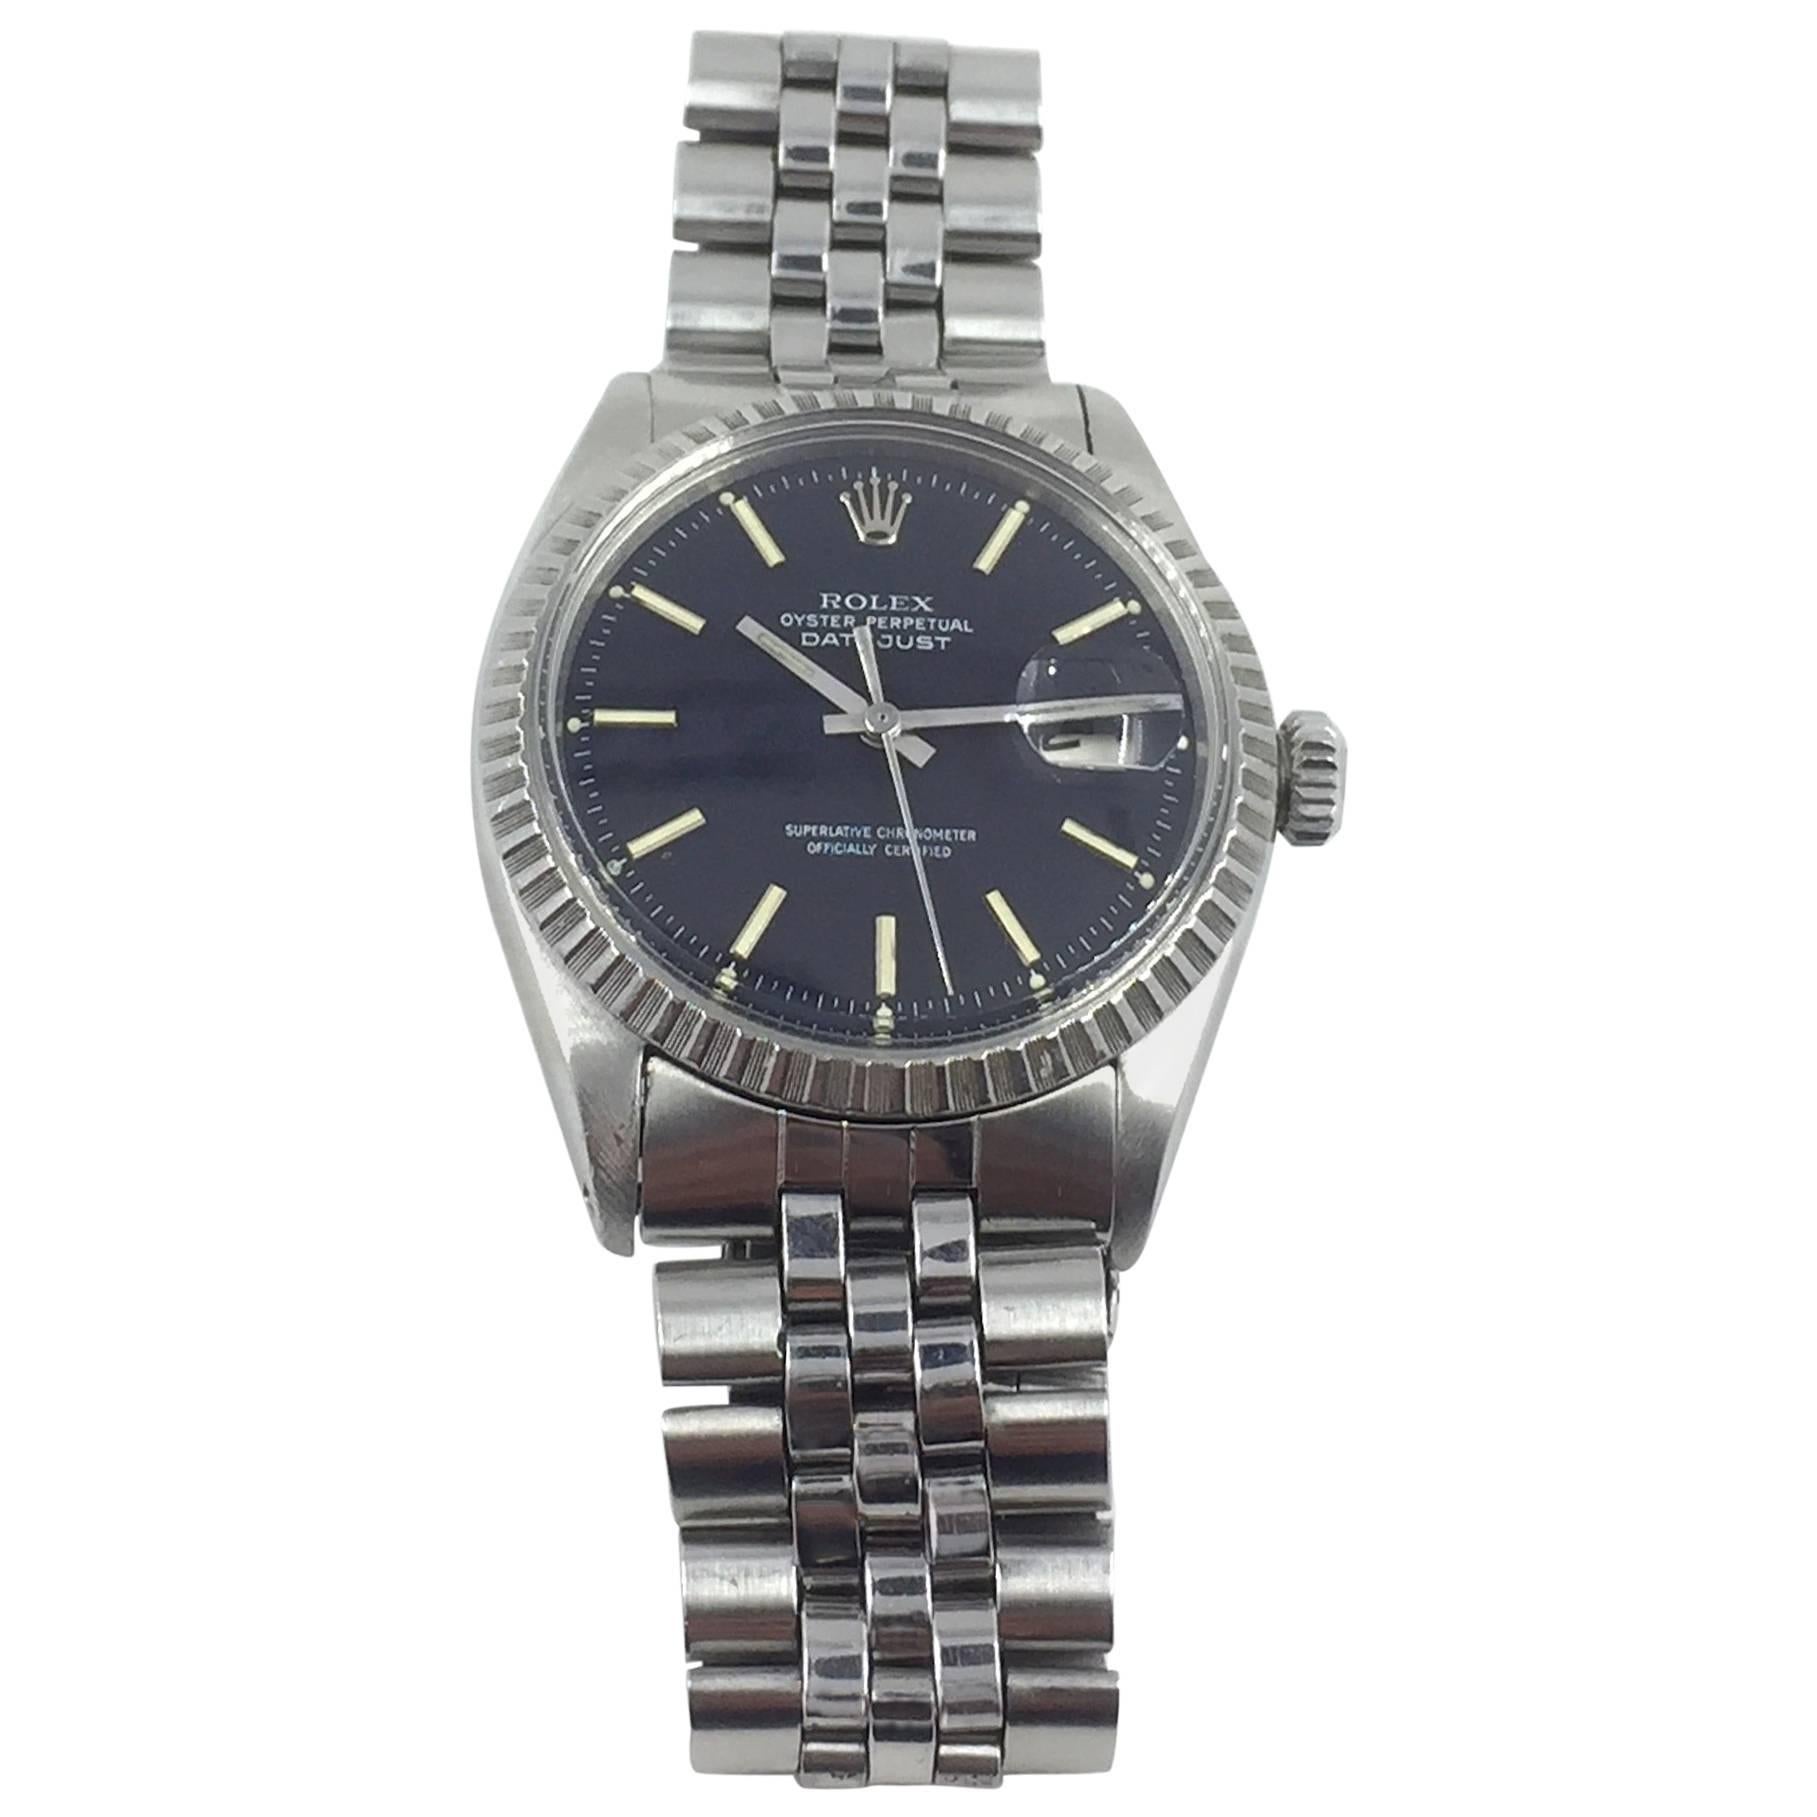 Rolex Stainless Steel Oyster Perpetual Datejust Automatic Wristwatch